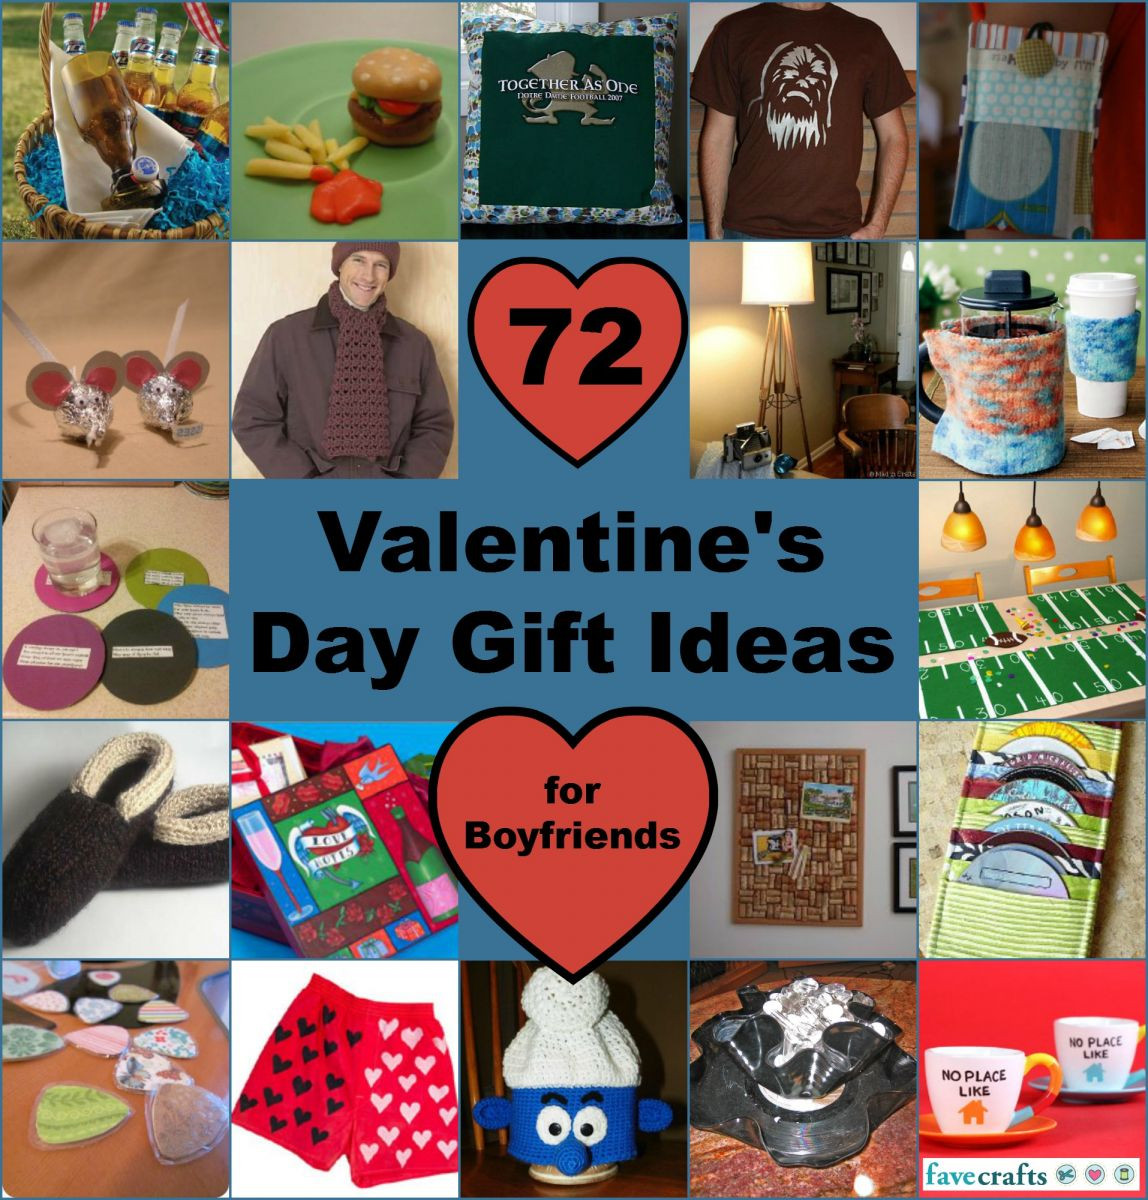 Ideas For Valentines Gift For Boyfriend
 Top 15 Favorite Valentine s Arts and Crafts Videos and